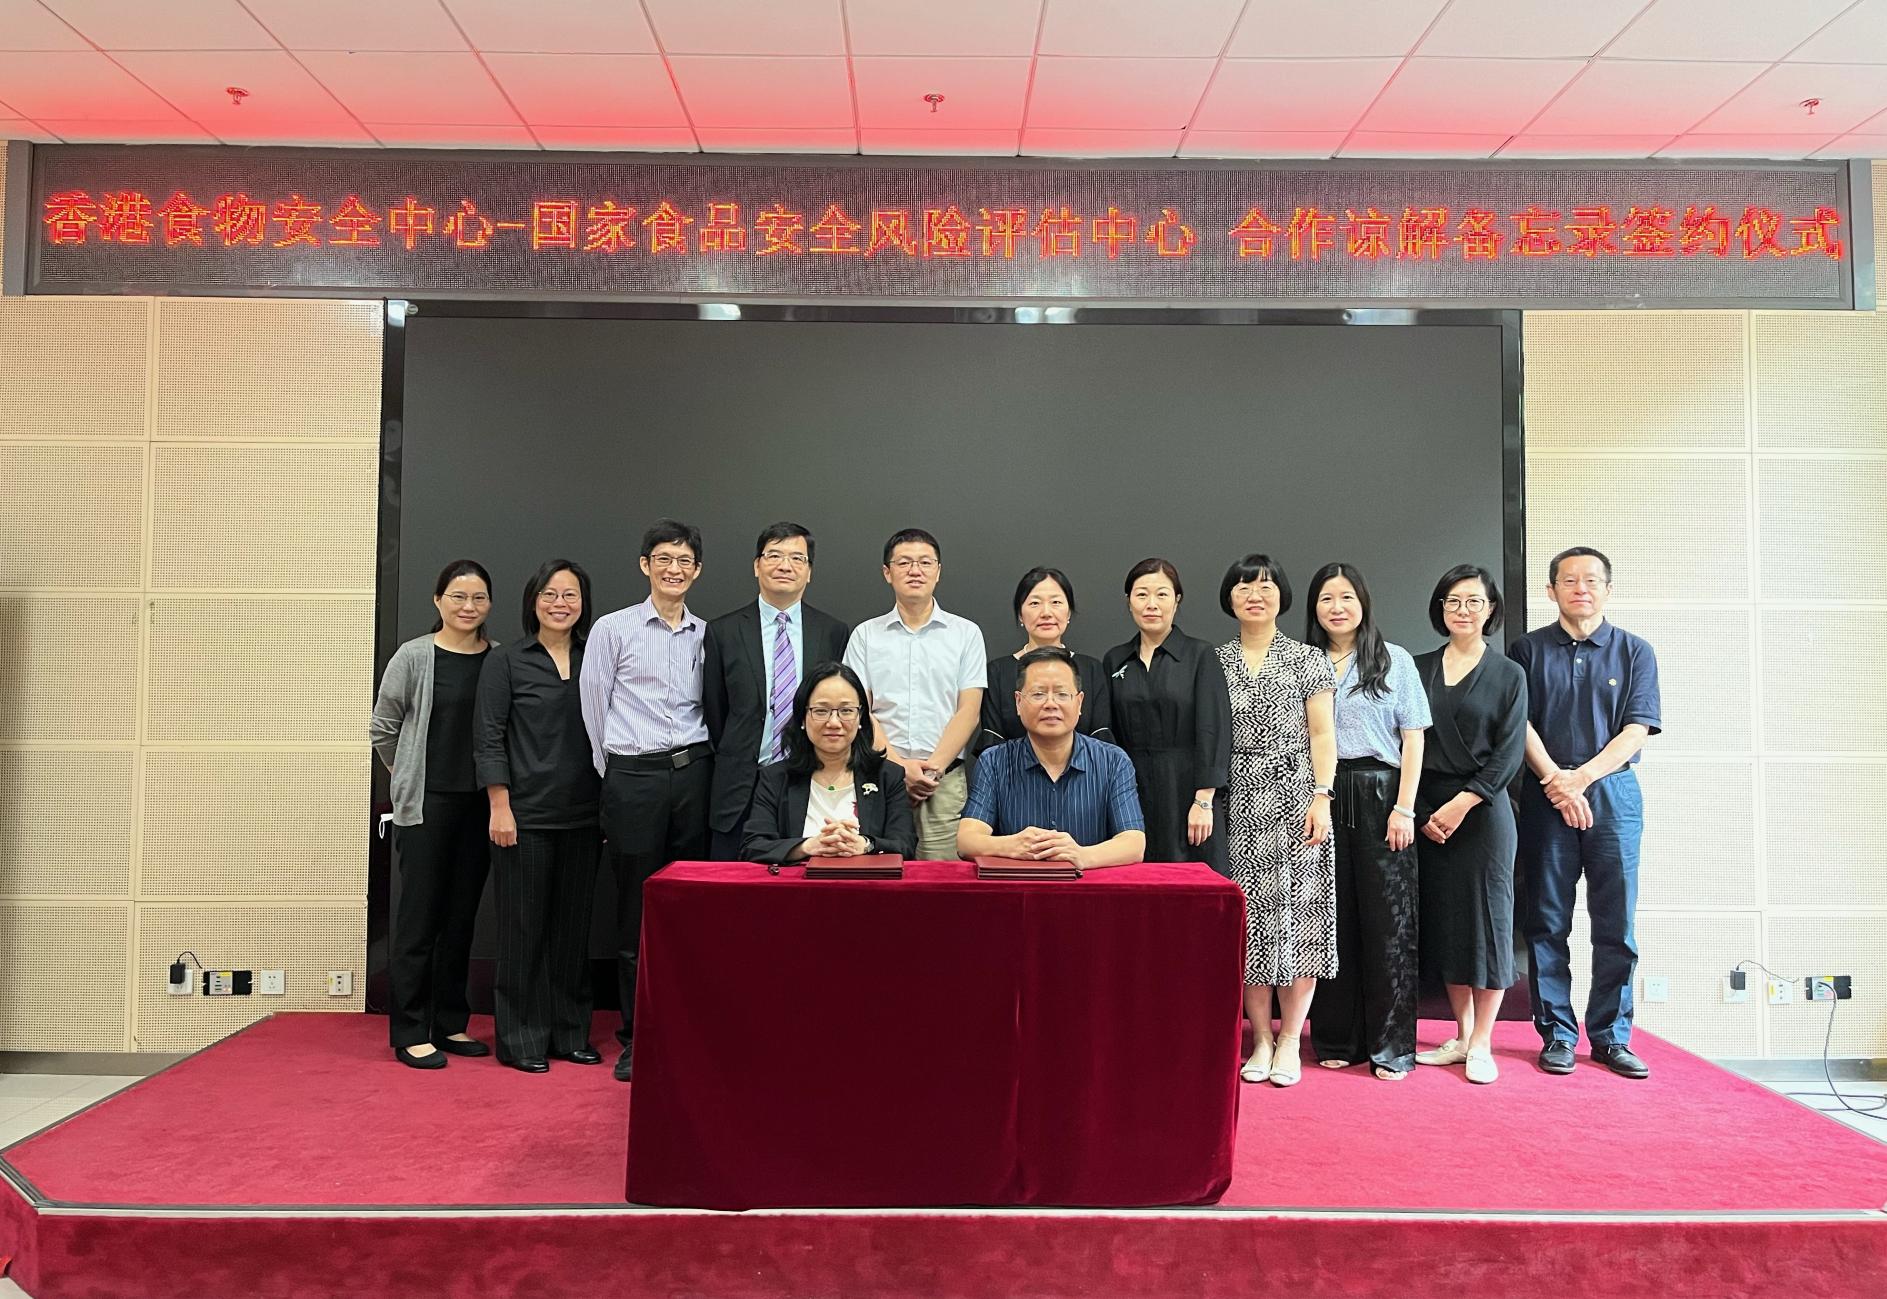 The Centre for Food Safety (CFS) of the Food and Environmental Hygiene Department of the Government of the Hong Kong Special Administrative Region (HKSAR) and the China National Center for Food Safety Risk Assessment signed a Memorandum of Understanding on food safety co-operation today (June 27), with a view to enhancing the exchange of information on food safety assessment work in Mainland China and the HKSAR, especially the work on food consumption surveys and total diet studies. Picture shows the Controller of the CFS, Dr Christine Wong (front row, left); the Deputy Director General of the China National Center for Food Safety Risk Assessment, Mr Wang Yongting (front row, right); the Principal Medical Officer (Risk Assessment & Communication) of the CFS, Dr Tony Chow (back row, fourth left); and the Deputy Director General of the China National Center for Food Safety Risk Assessment, Mr Fan Yongxiang (back row, fifth left), at the signing ceremony.